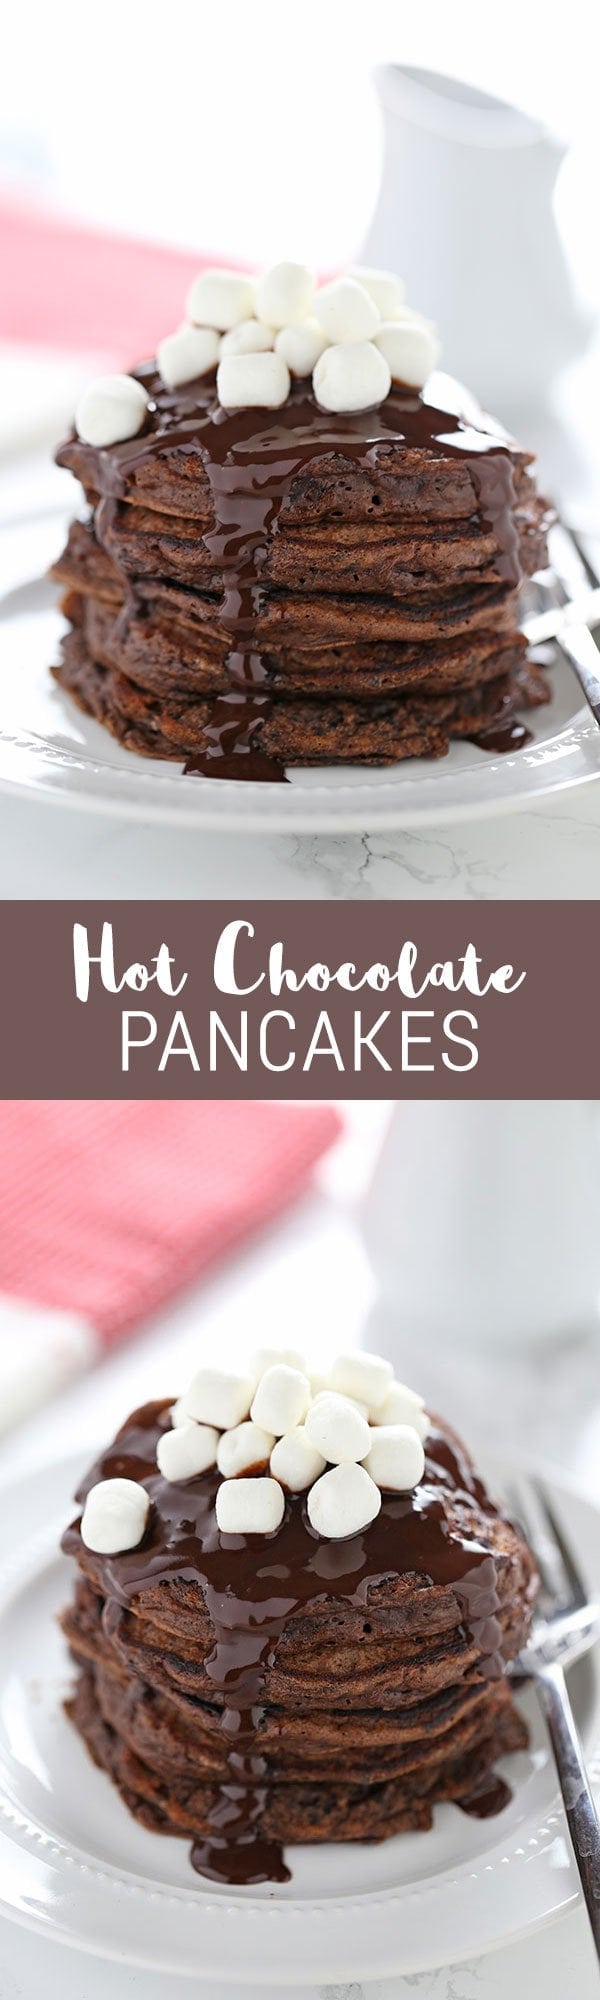 Make these for Christmas morning!! So delicious, and they take less than 30 minutes! We loved this Hot chocolate pancake recipe.